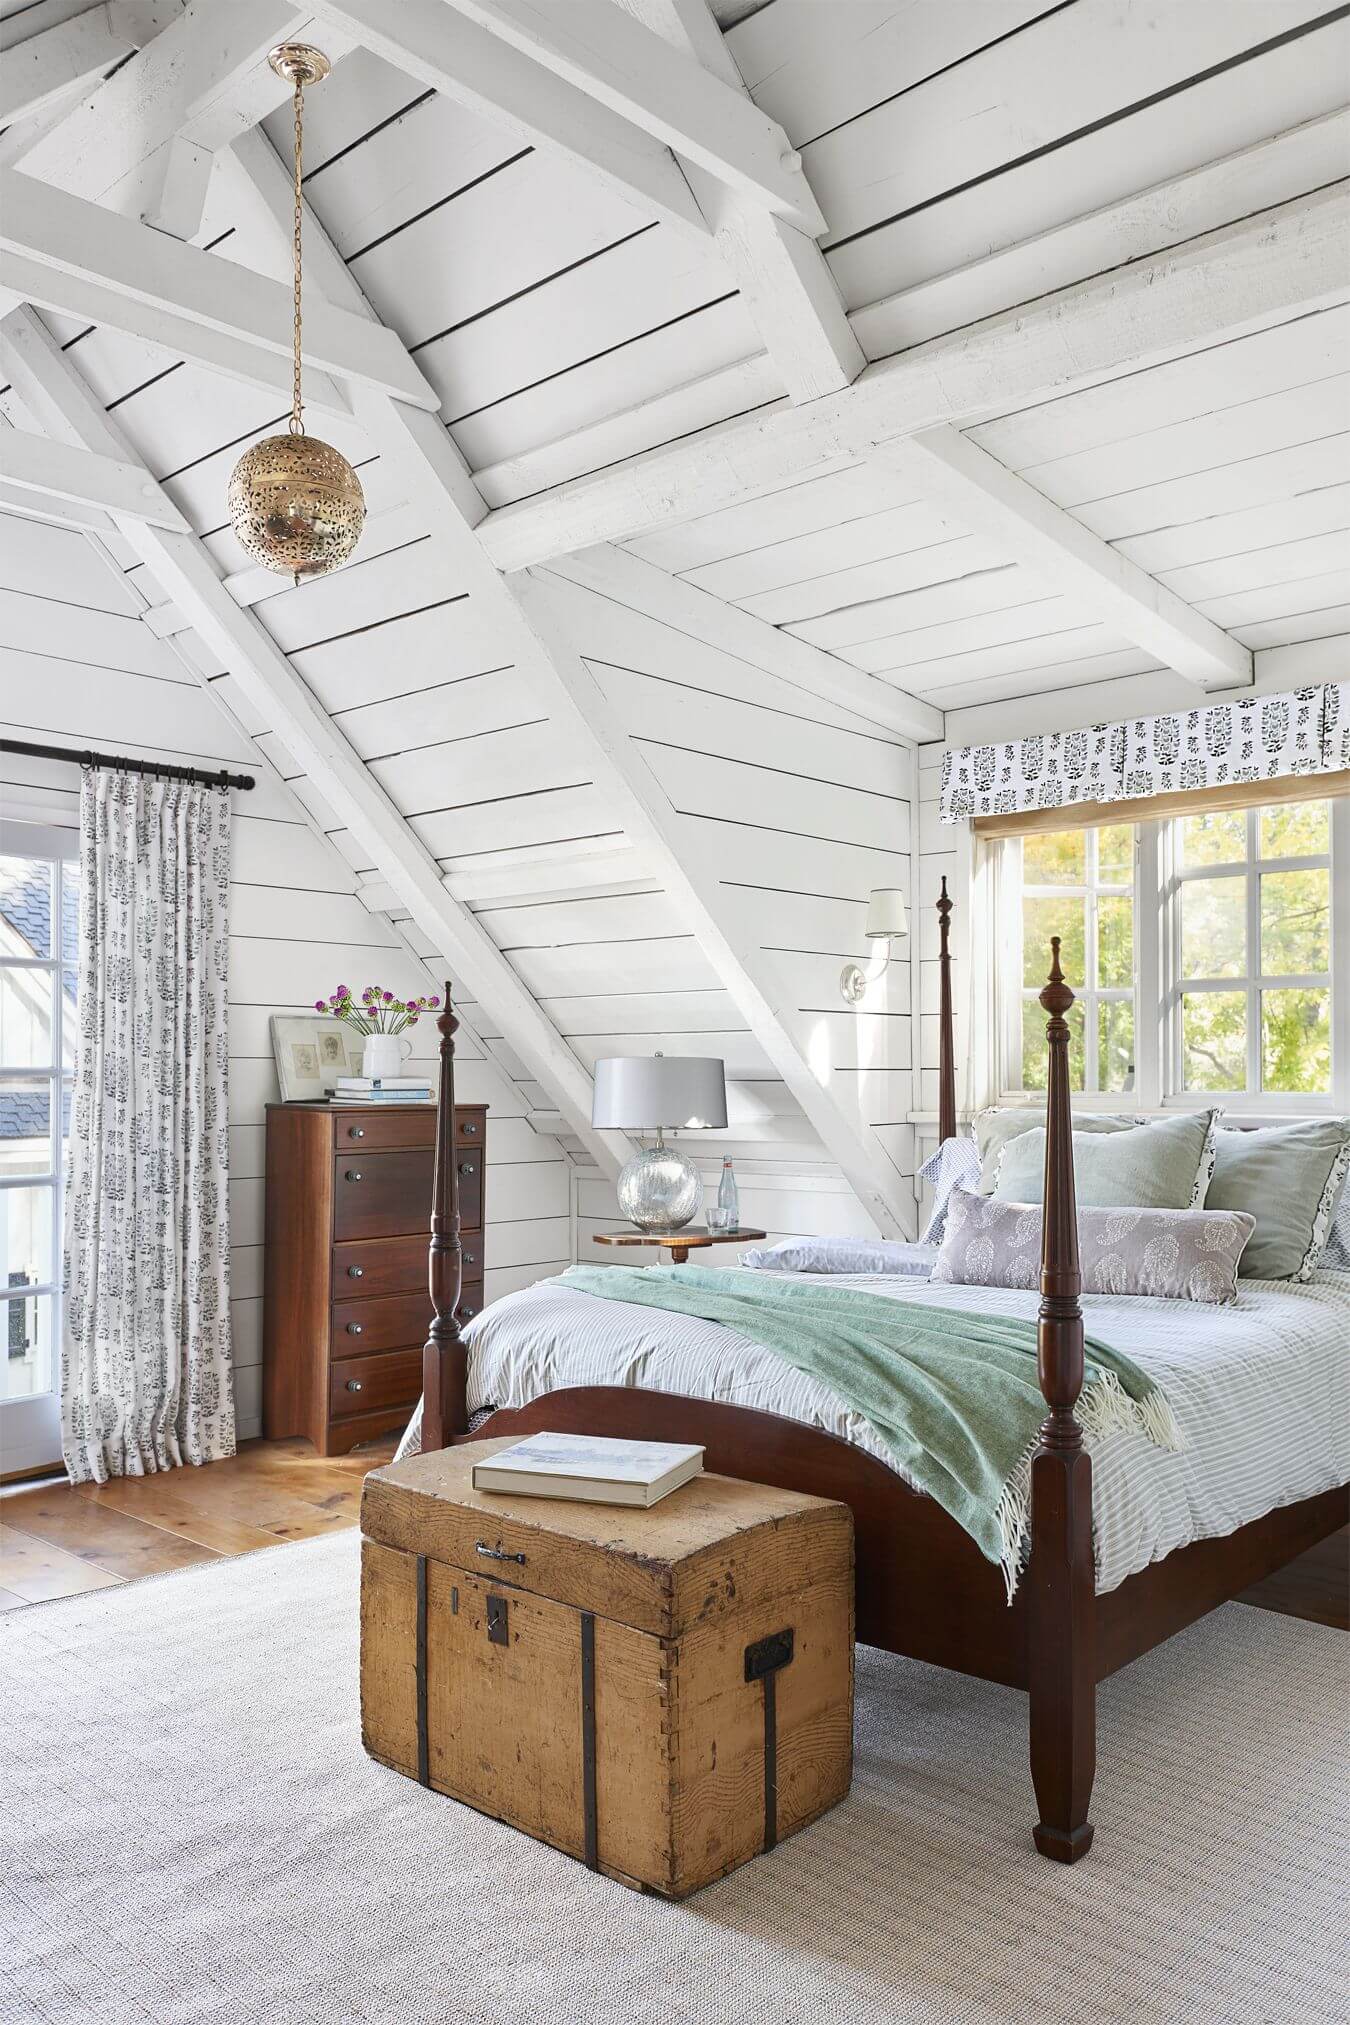 White ceilings with globe light fixture, and a vintage wood trunk